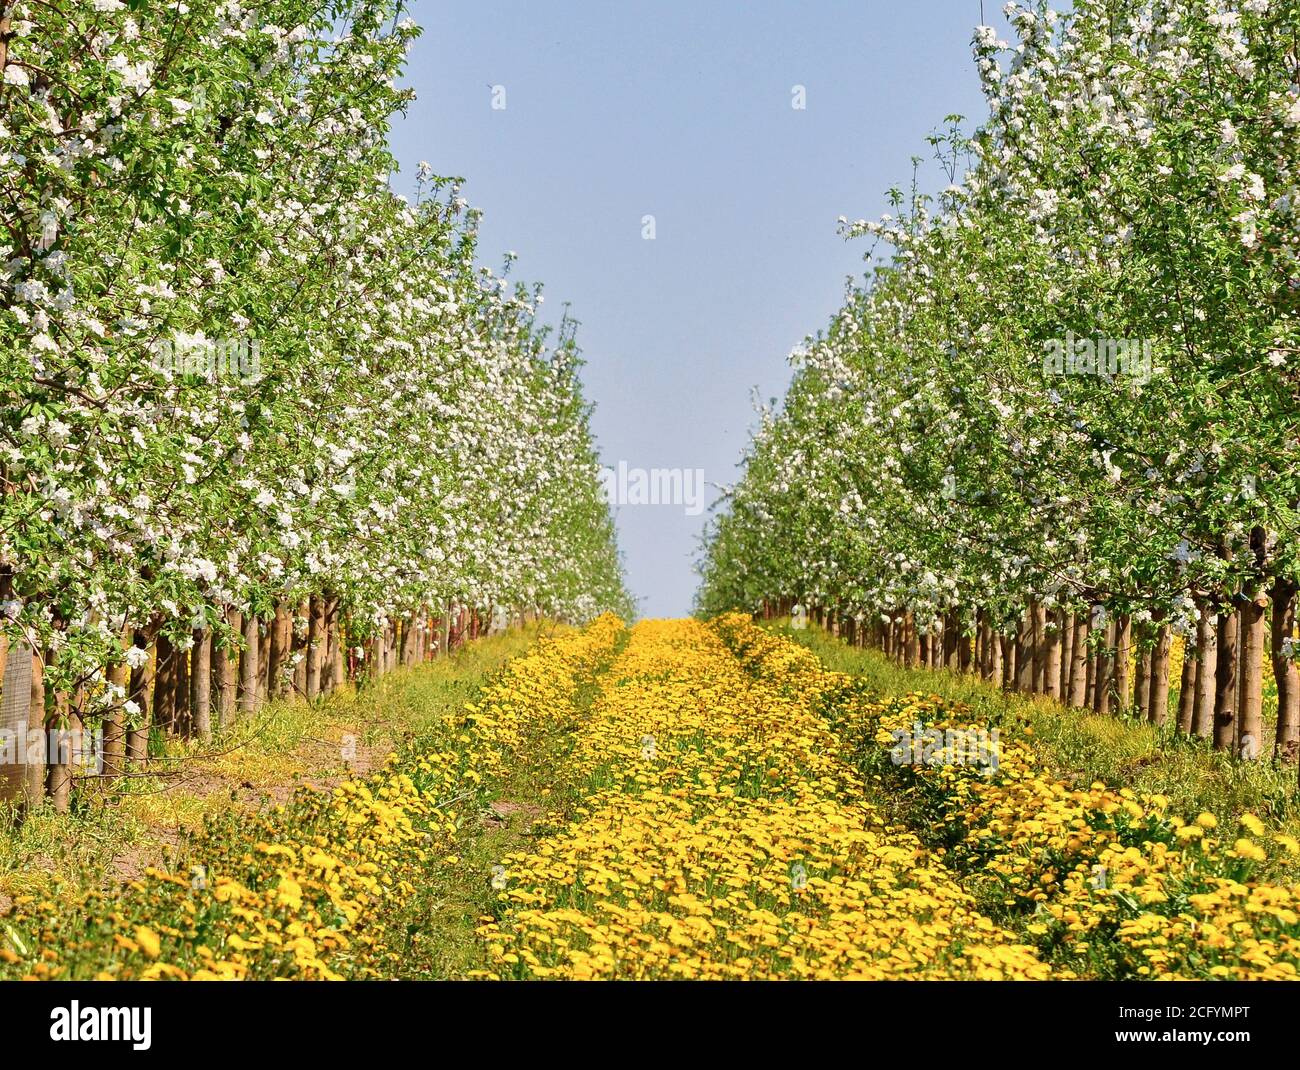 Apple orchard in spring in bloom. Between the rows of flowering trees a field of yellow dandelions. Stock Photo